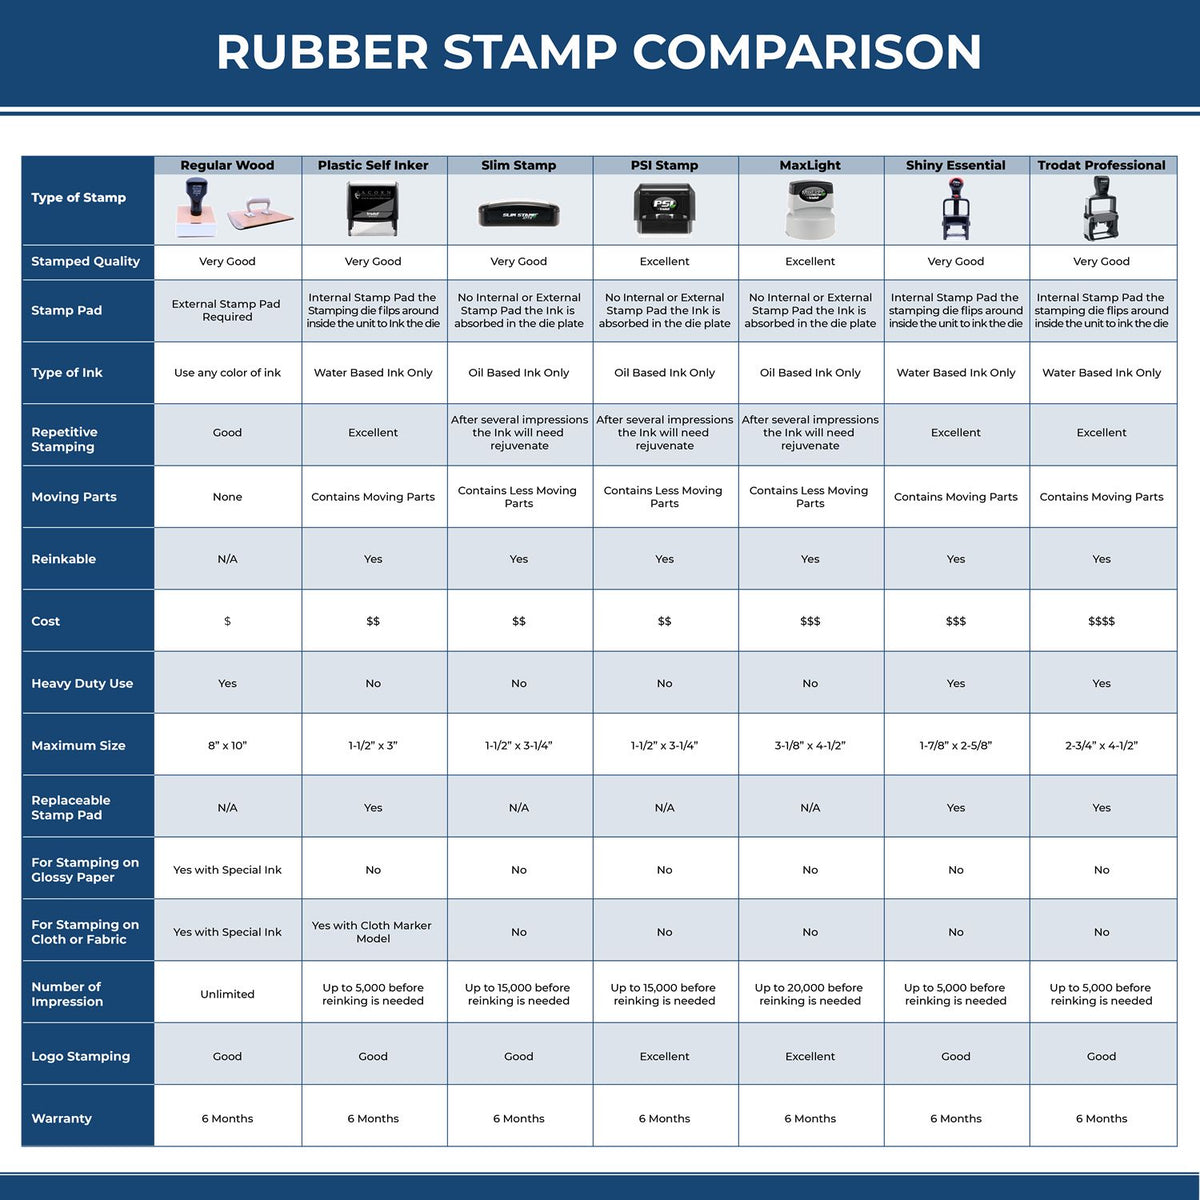 A comparison chart for the different types of mount models available for the MaxLight Premium Pre-Inked Arkansas Rectangular Notarial Stamp.